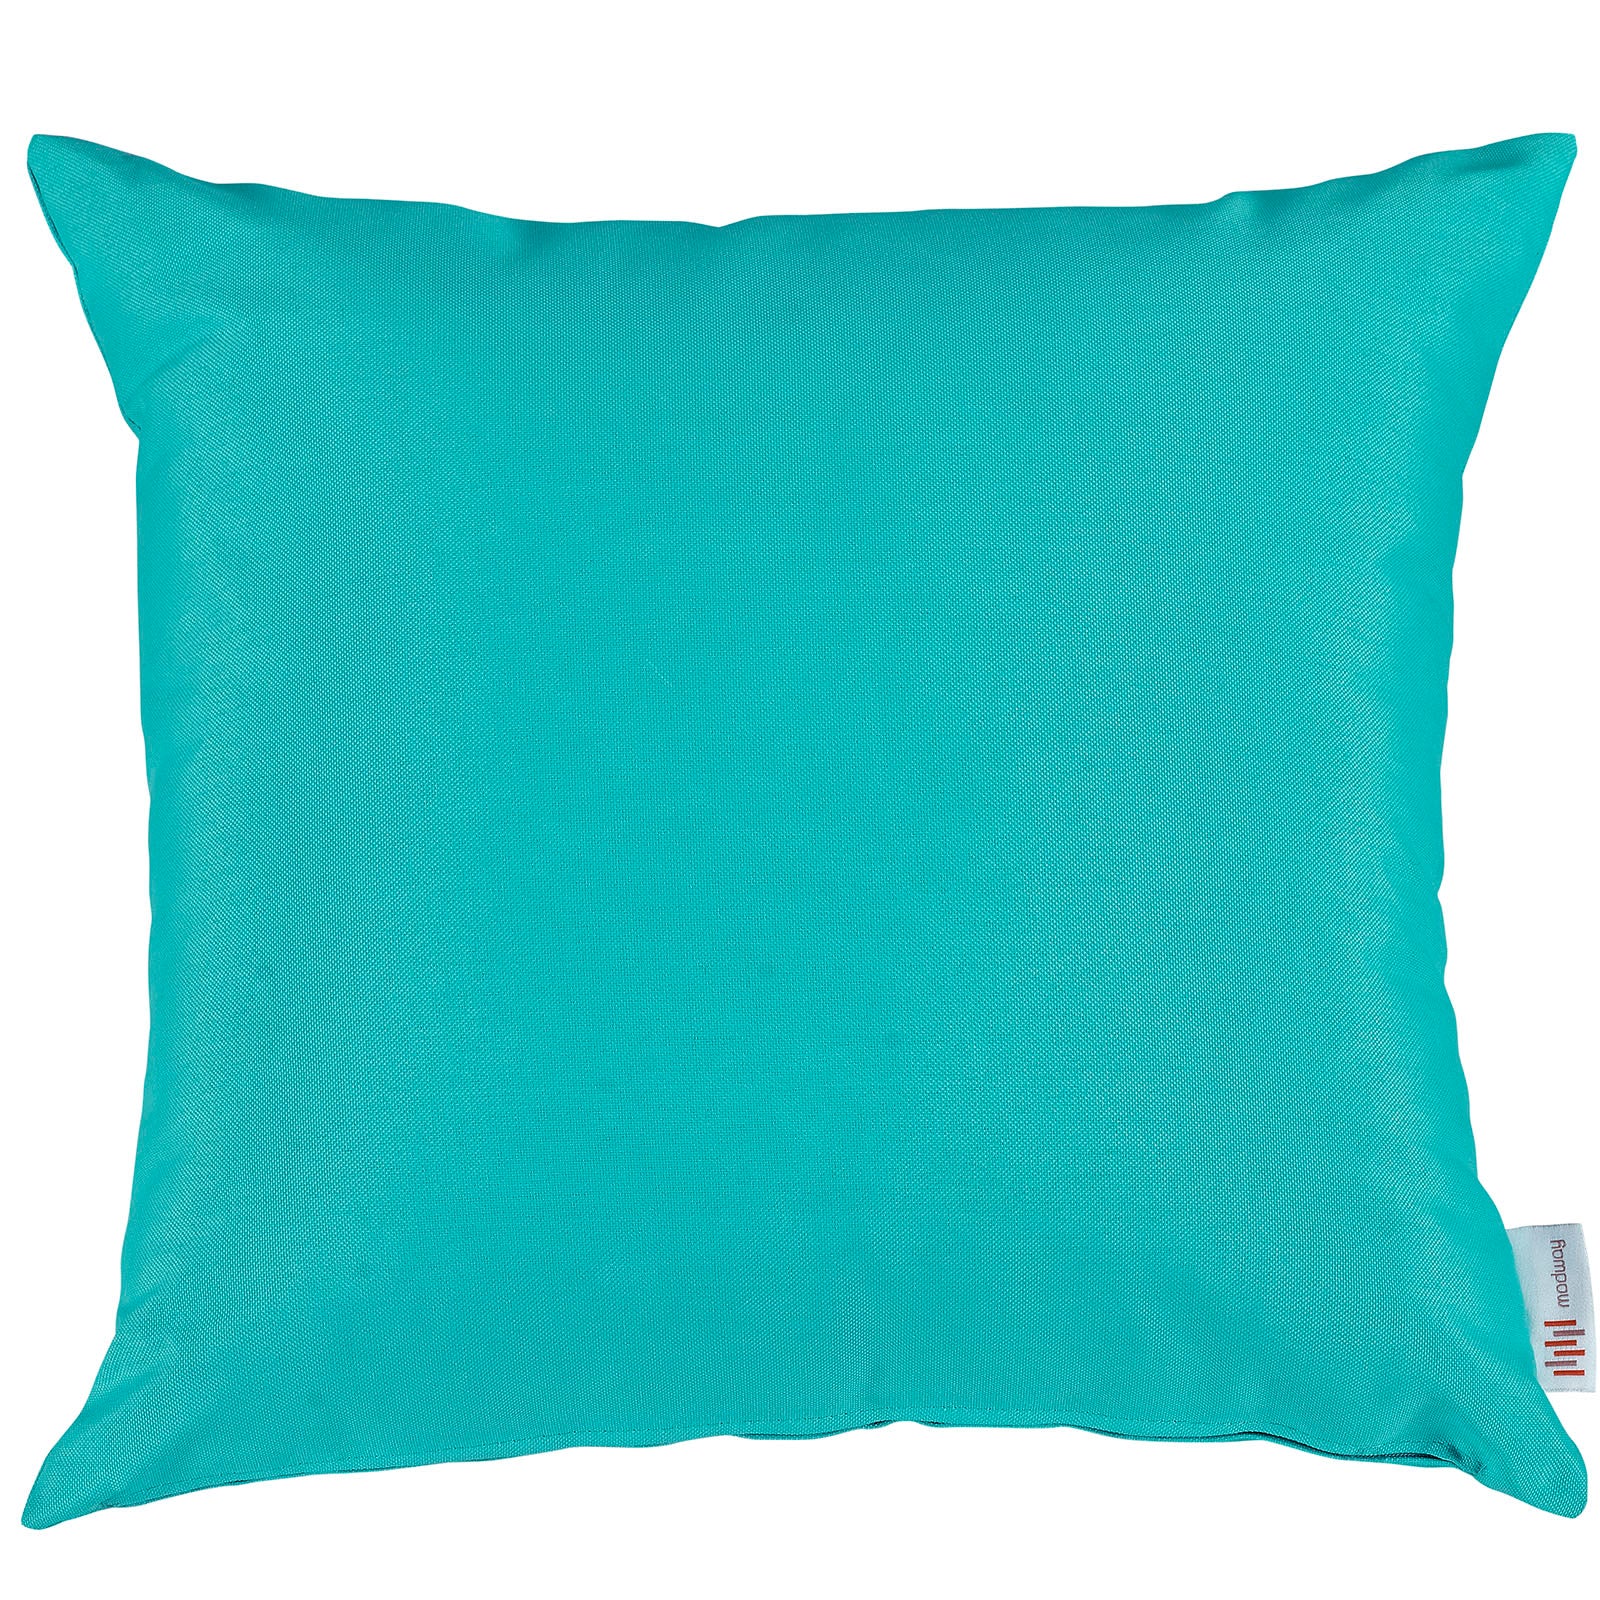 Modway Outdoor Pillows & Cushions - Convene Outdoor Patio Pillow Turquoise (Set of 2)